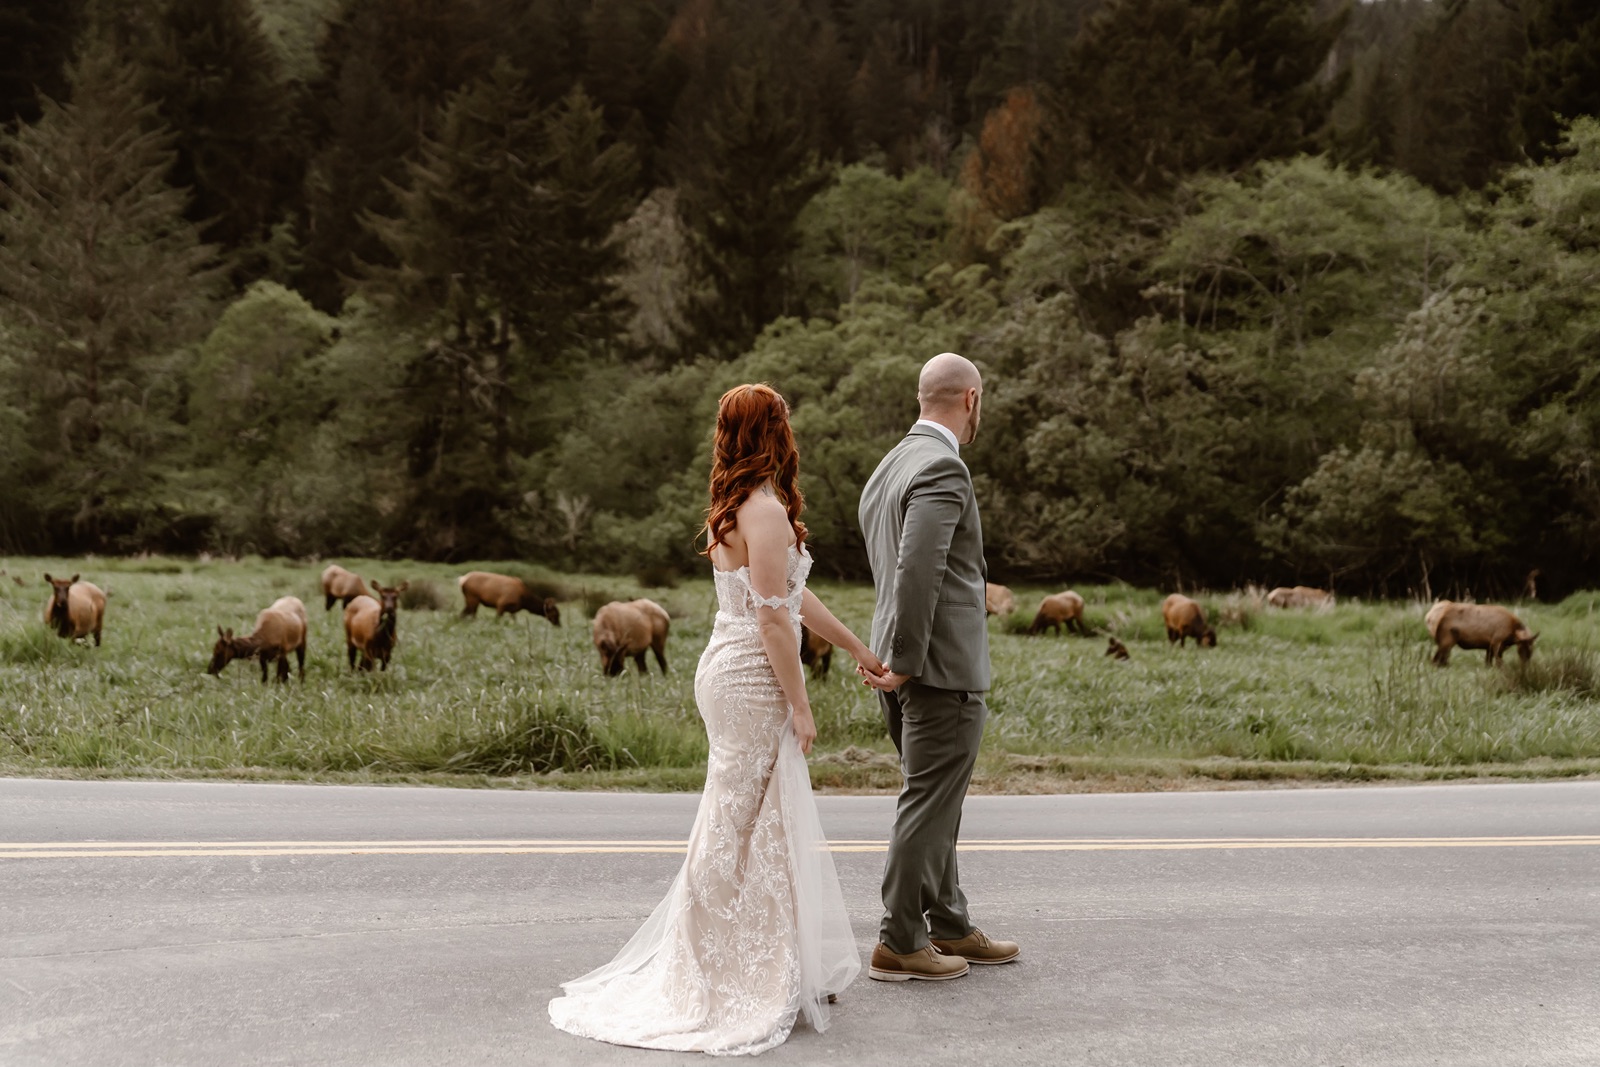 Bride and groom hold hands while admiring cows in pasture